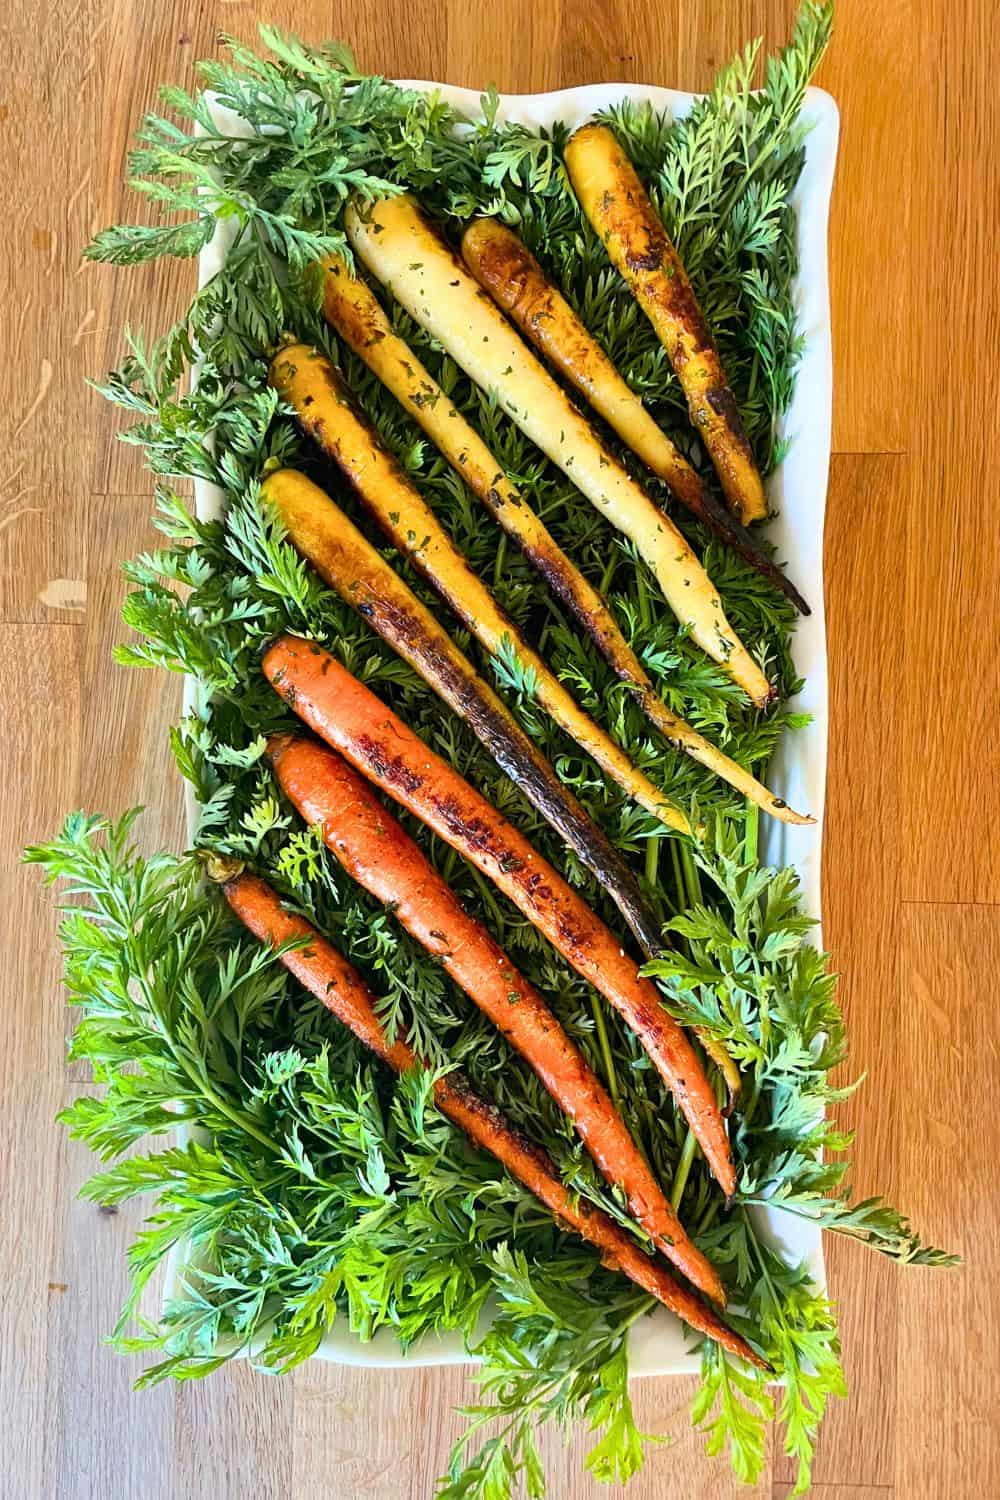 Carrots in serving dish